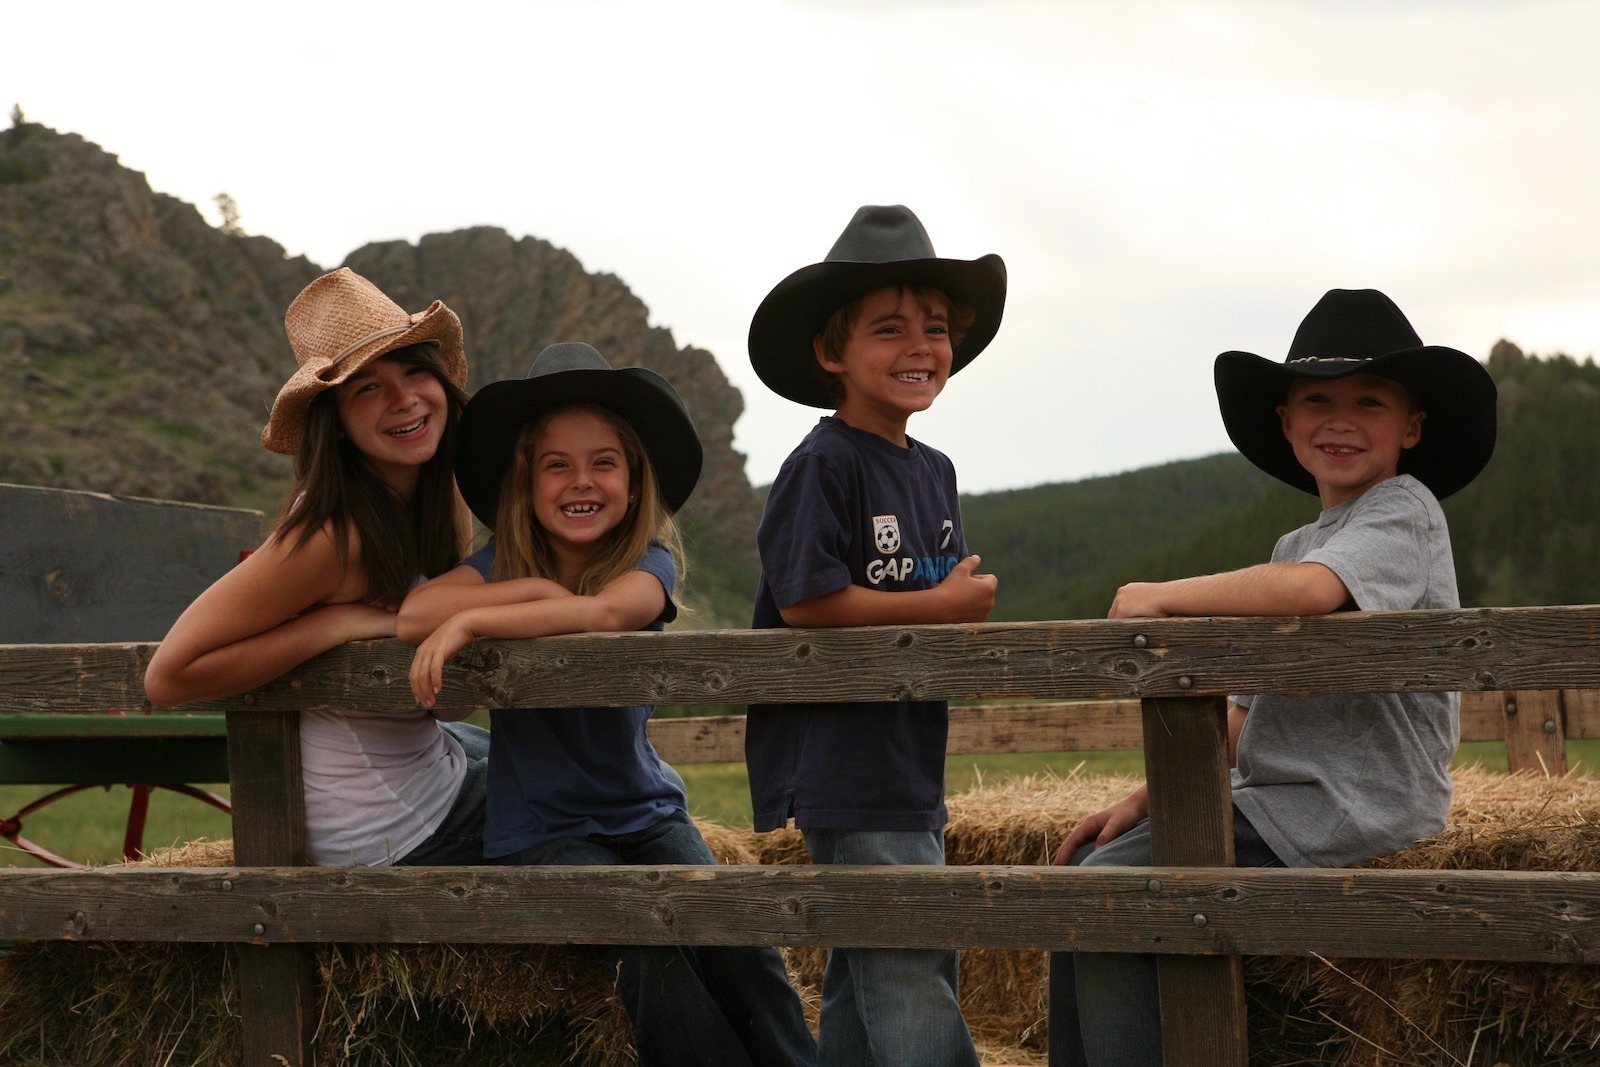 Kids love Dude Ranches